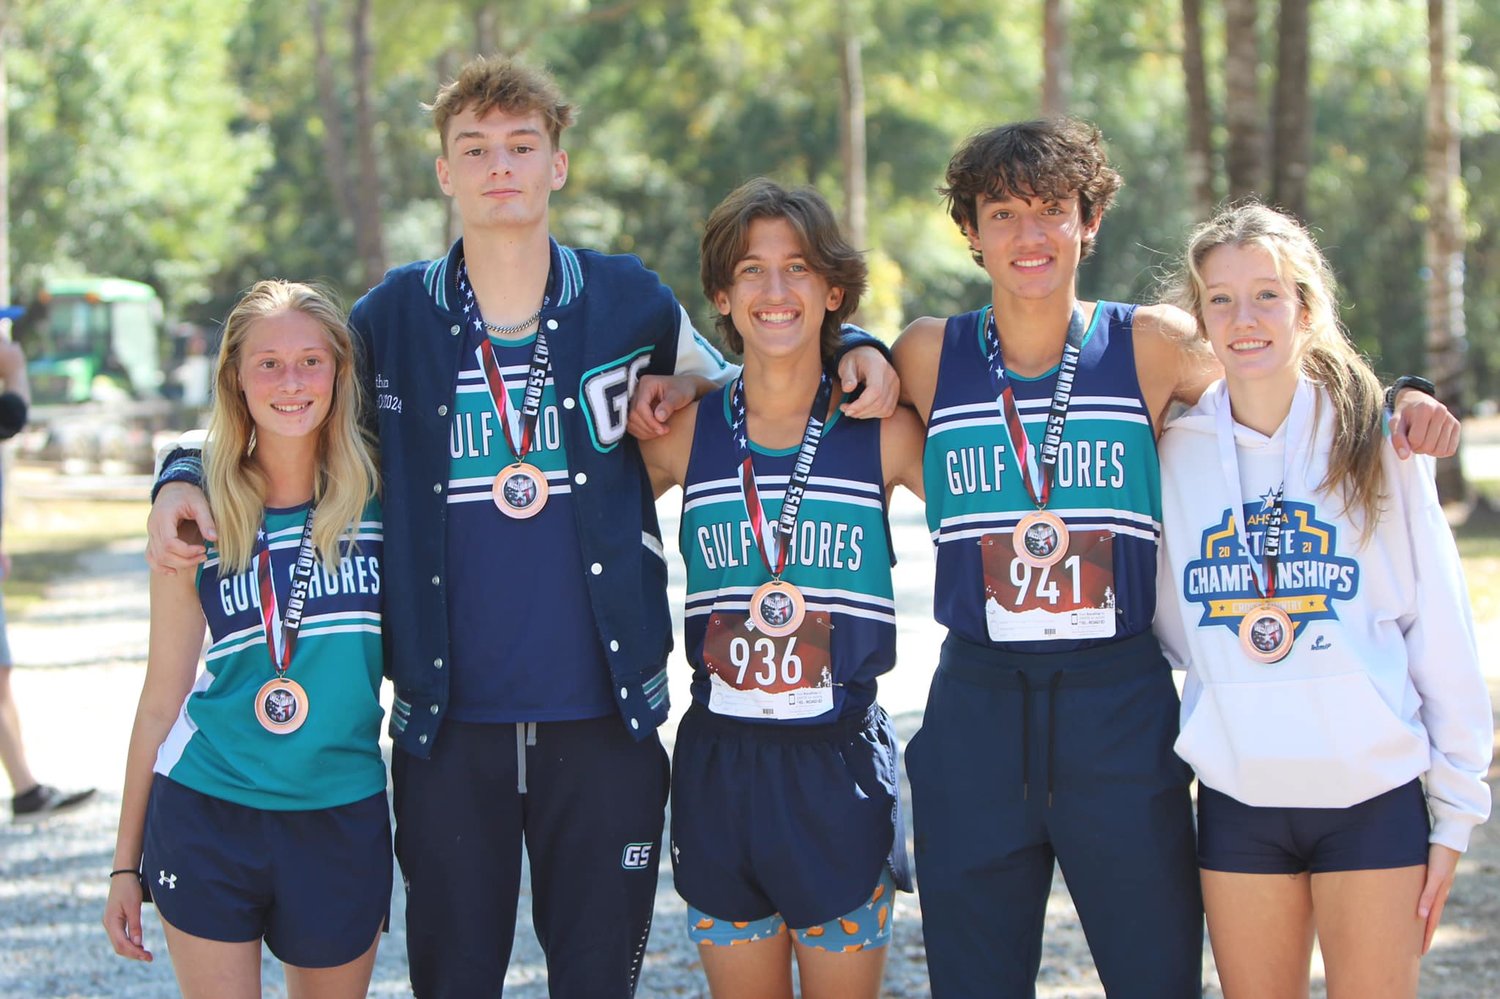 Gulf Shores had five runners record top-15 finishes at the Class 5A Section 1 Championship, including Beck Montiel, Ethan Sharkey, Daniel Dumas, Maggie Snider and Jacey Hughes. That group is among 15 Dolphins that will compete at the state championship meet this Saturday alongside 149 other runners from Baldwin County.